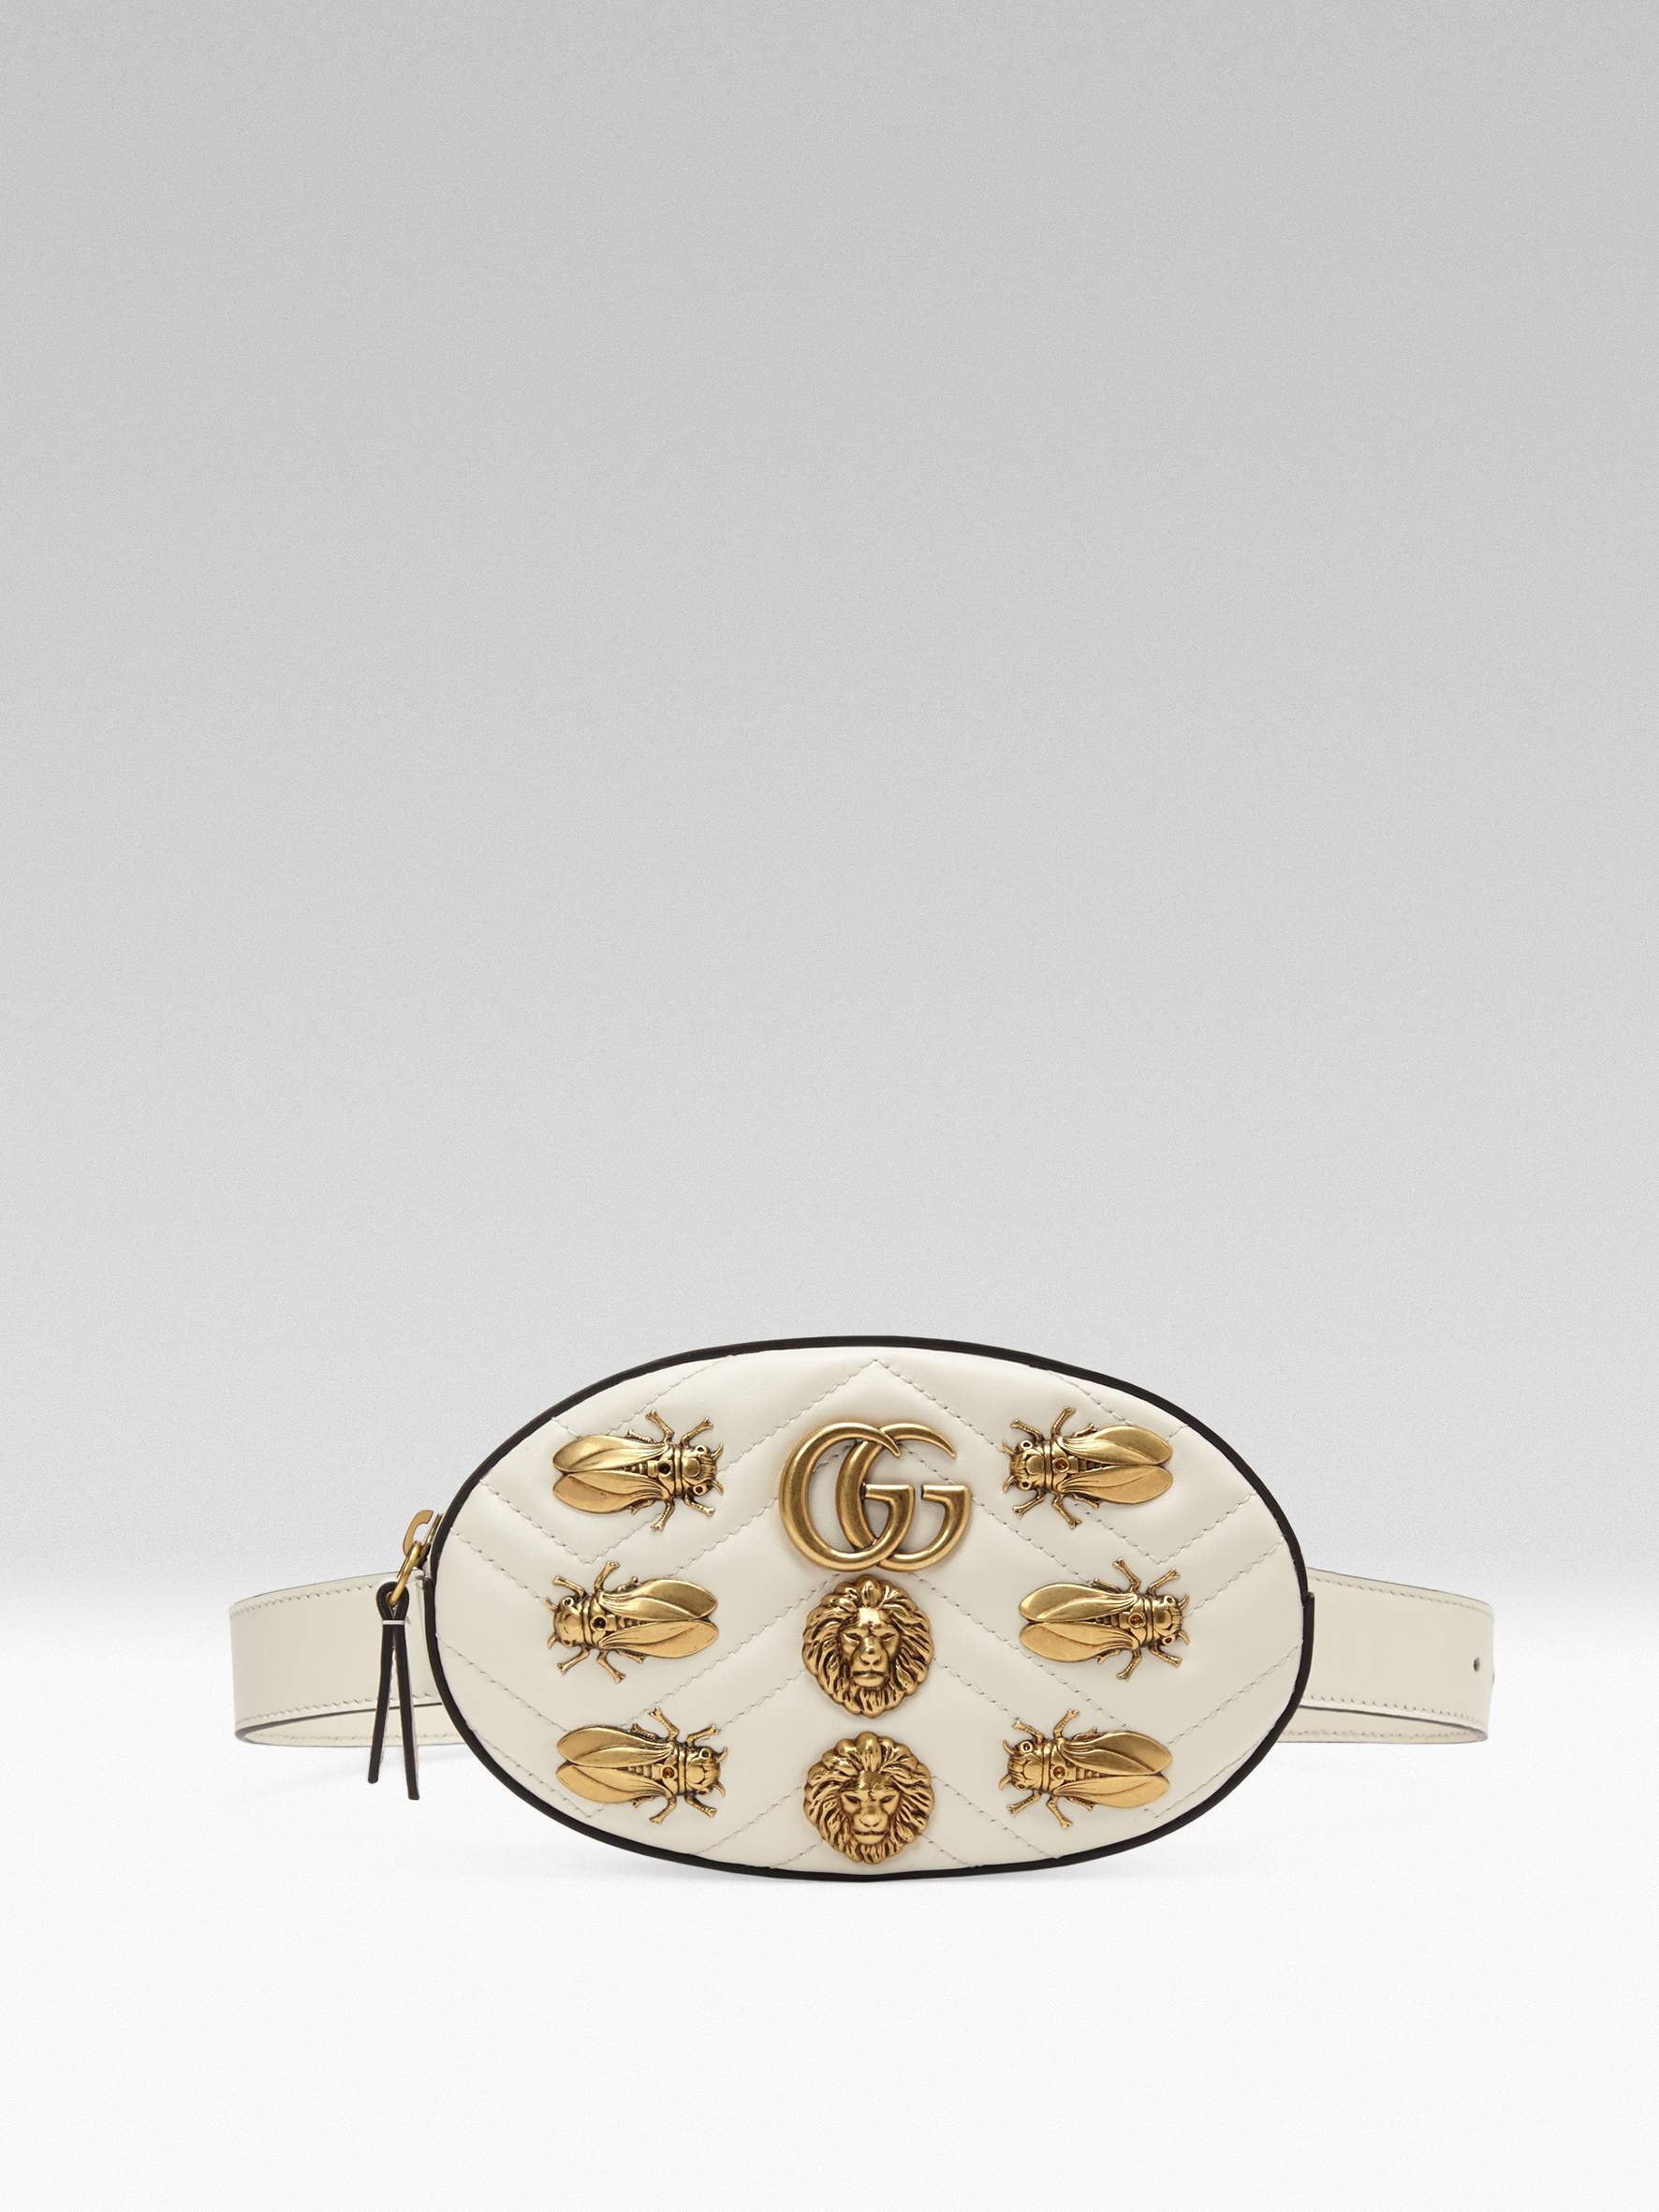 Embellished bag, Gucci, price on request